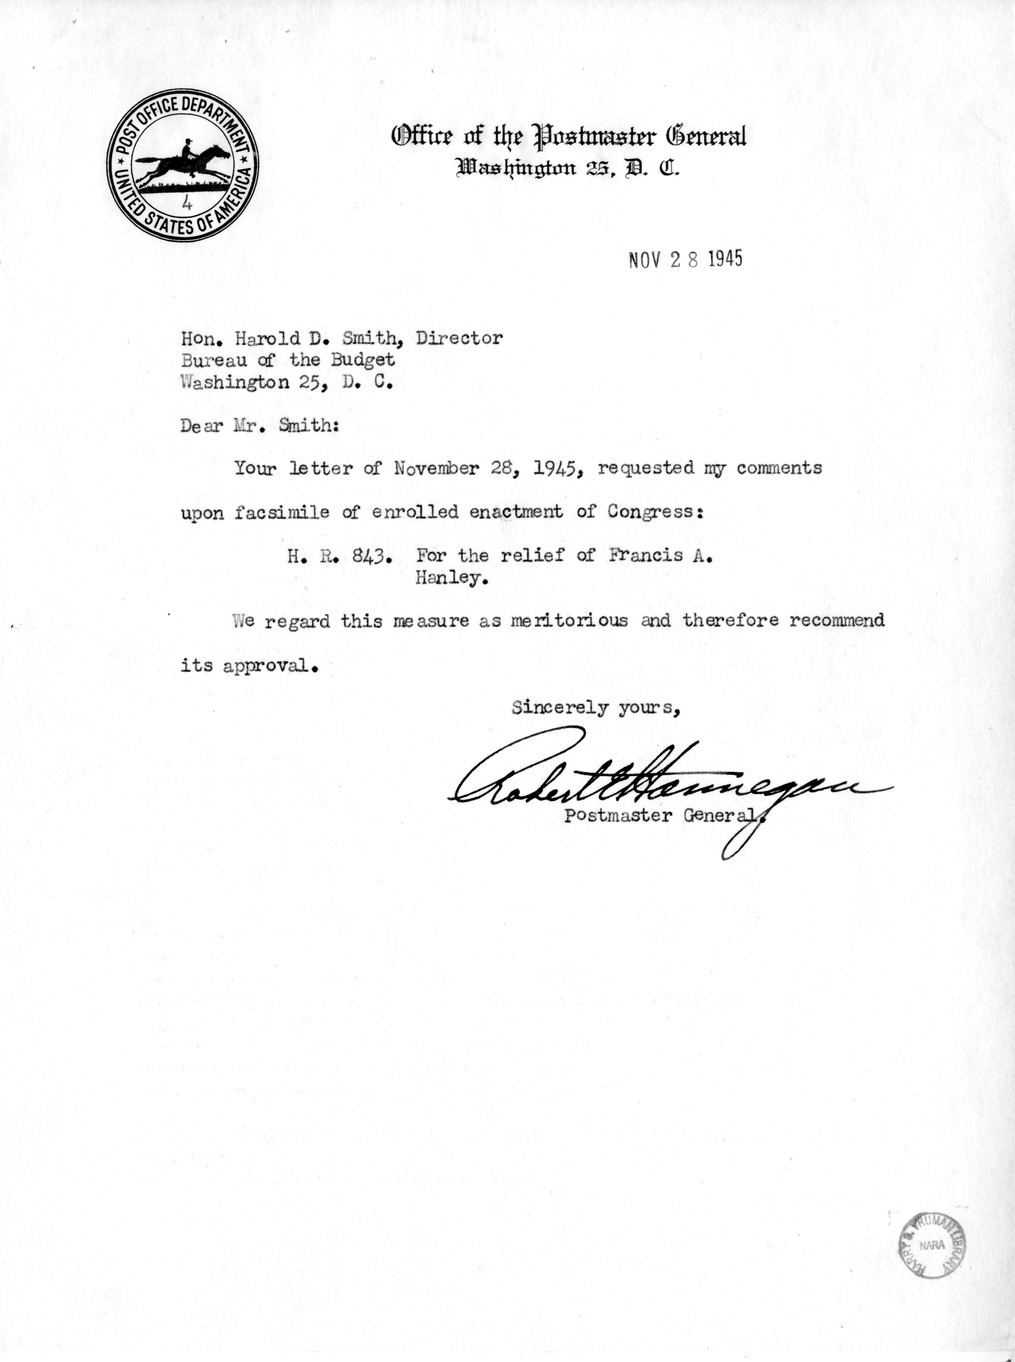 Memorandum from Frederick J. Bailey to M. C. Latta, H.R. 843, For the Relief of Francis A. Hanley, with Attachments